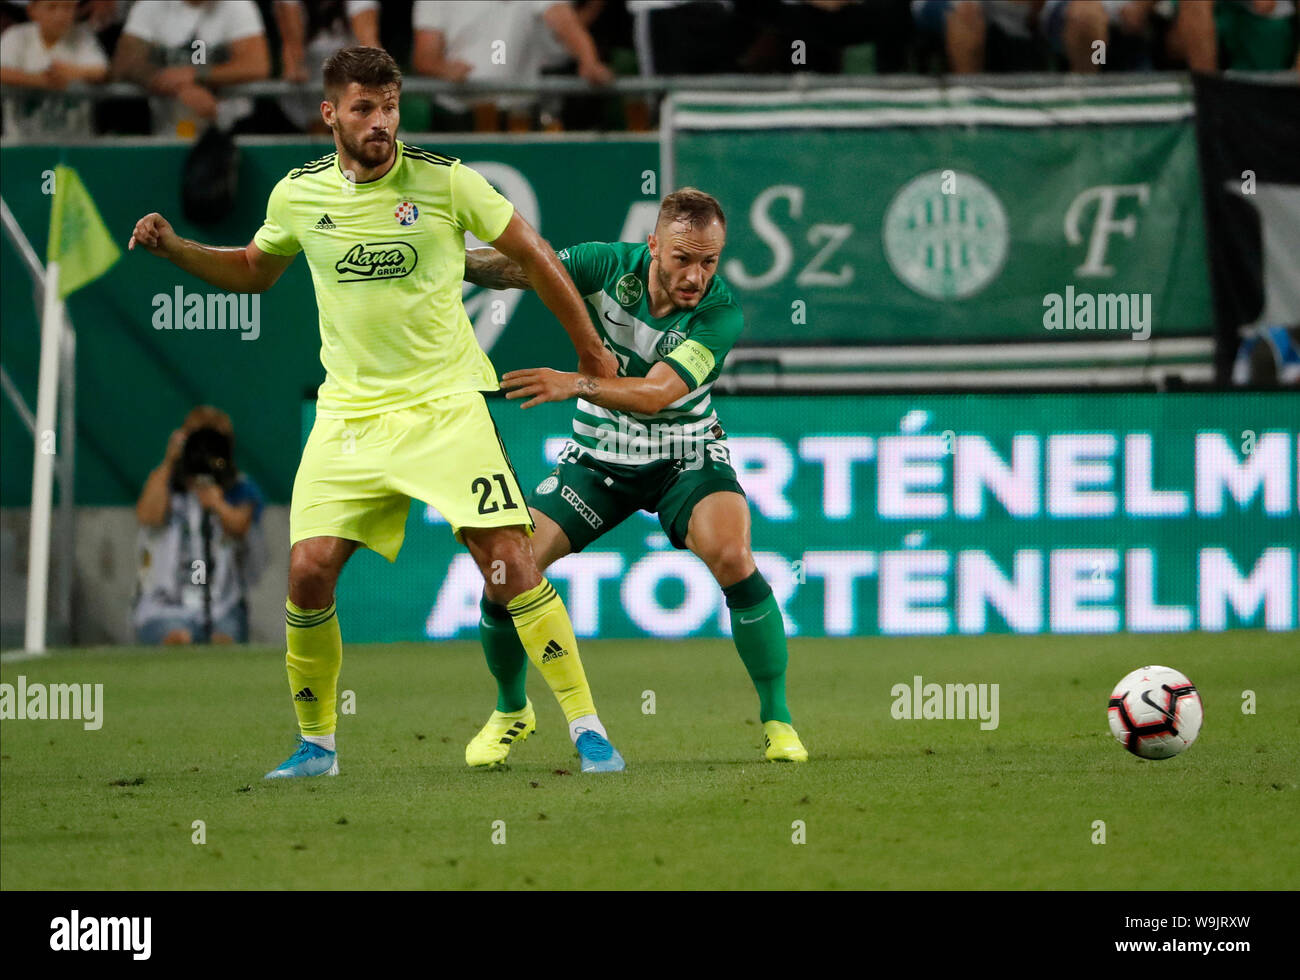 BUDAPEST, HUNGARY - AUGUST 13: (l-r) Tokmac Chol Nguen of Ferencvarosi TC  wins the ball from Arijan Ademi of GNK Dinamo Zagreb during the UEFA  Champions League Third Qualifying Round match between